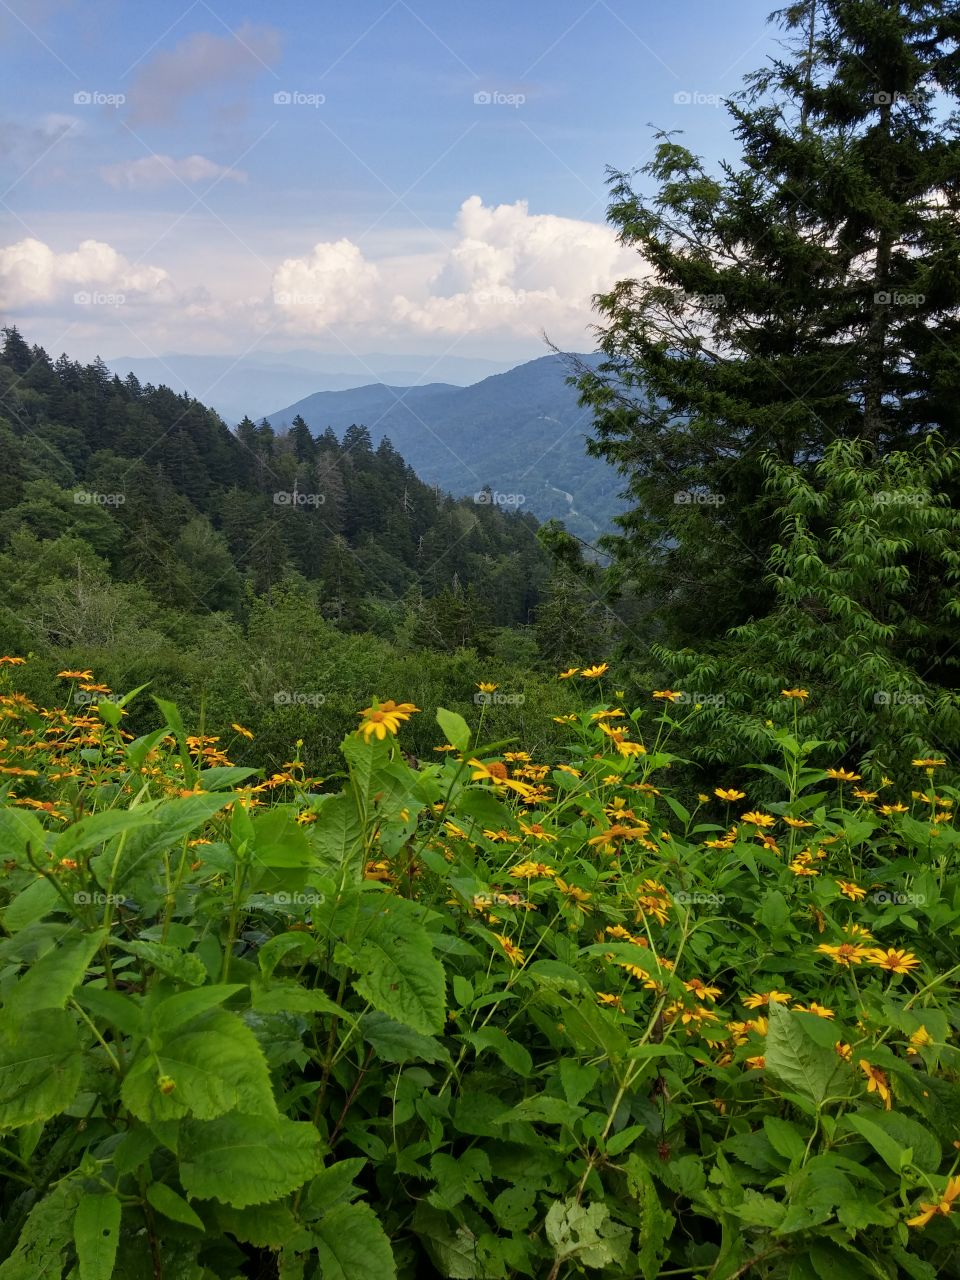 The Great Smoky Mountains. A beautiful summer day from the smoky mountains in Tennessee